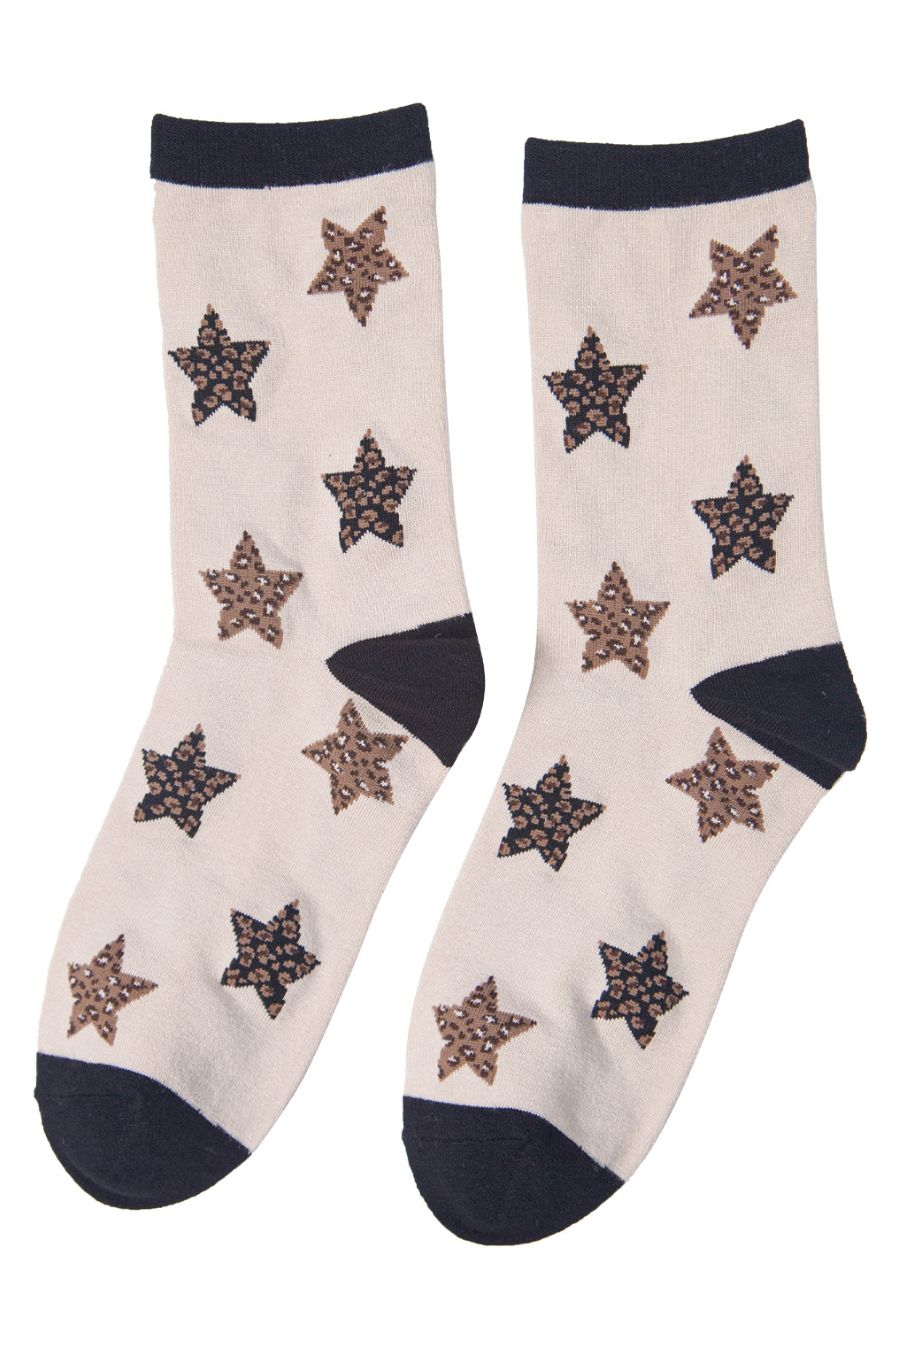 cream coloured bamboo ankle socks with all over leopard print star pattern